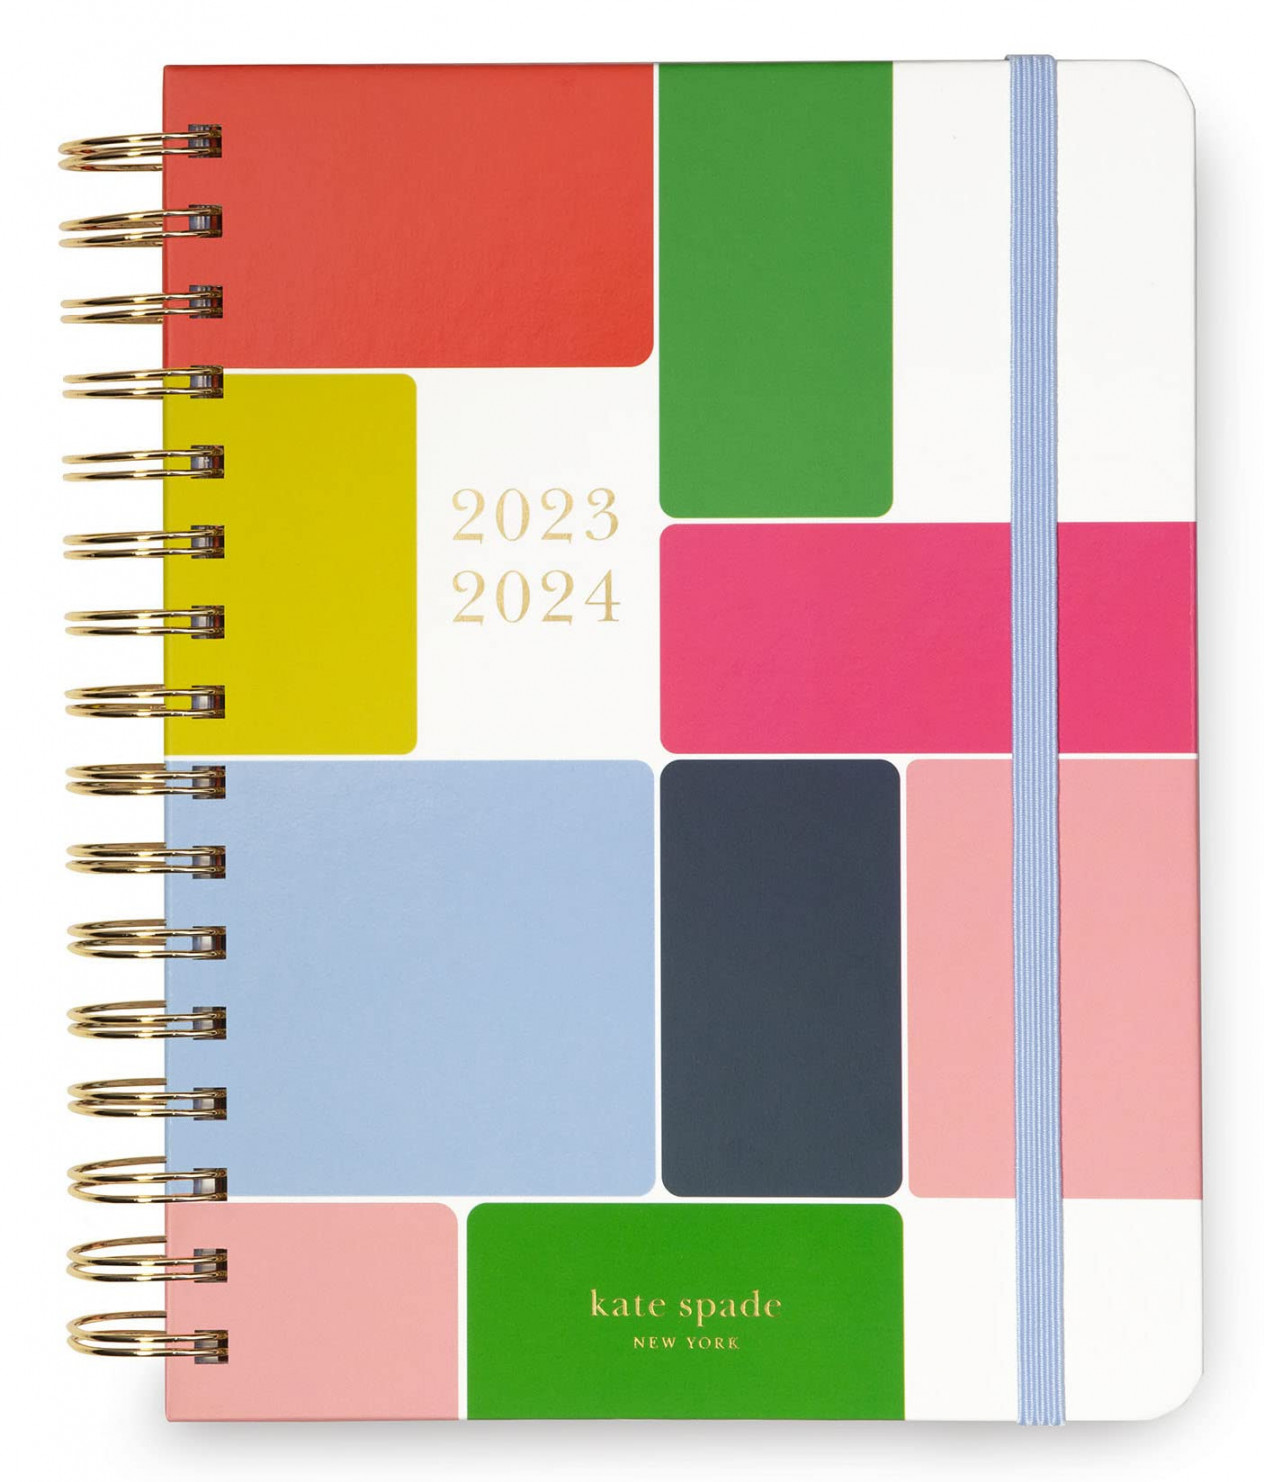 Kate Spade New York Daily Planner -, Large Planner August  -  December , Hardcover SpSee more Kate Spade New York Daily Planner